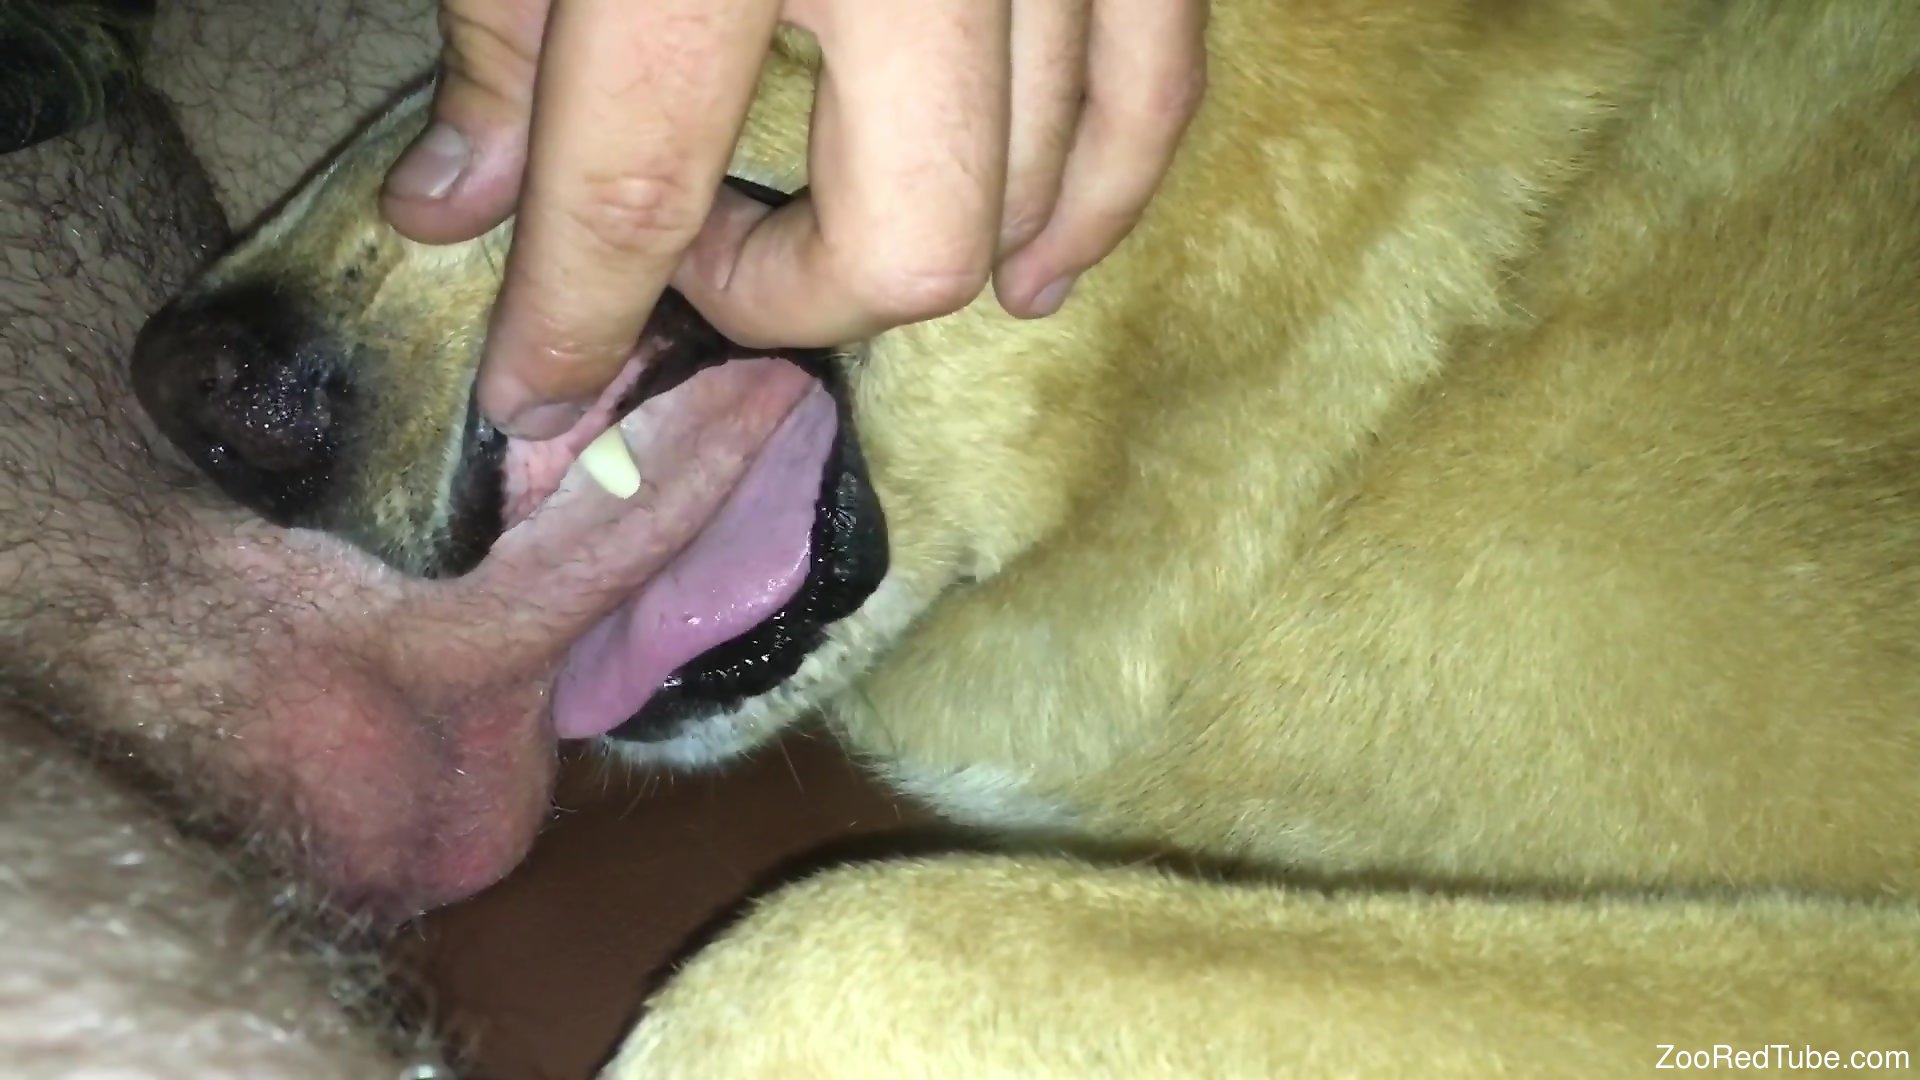 Dog Beeg Hd - Dude punishing a dog's throat with his hard cock